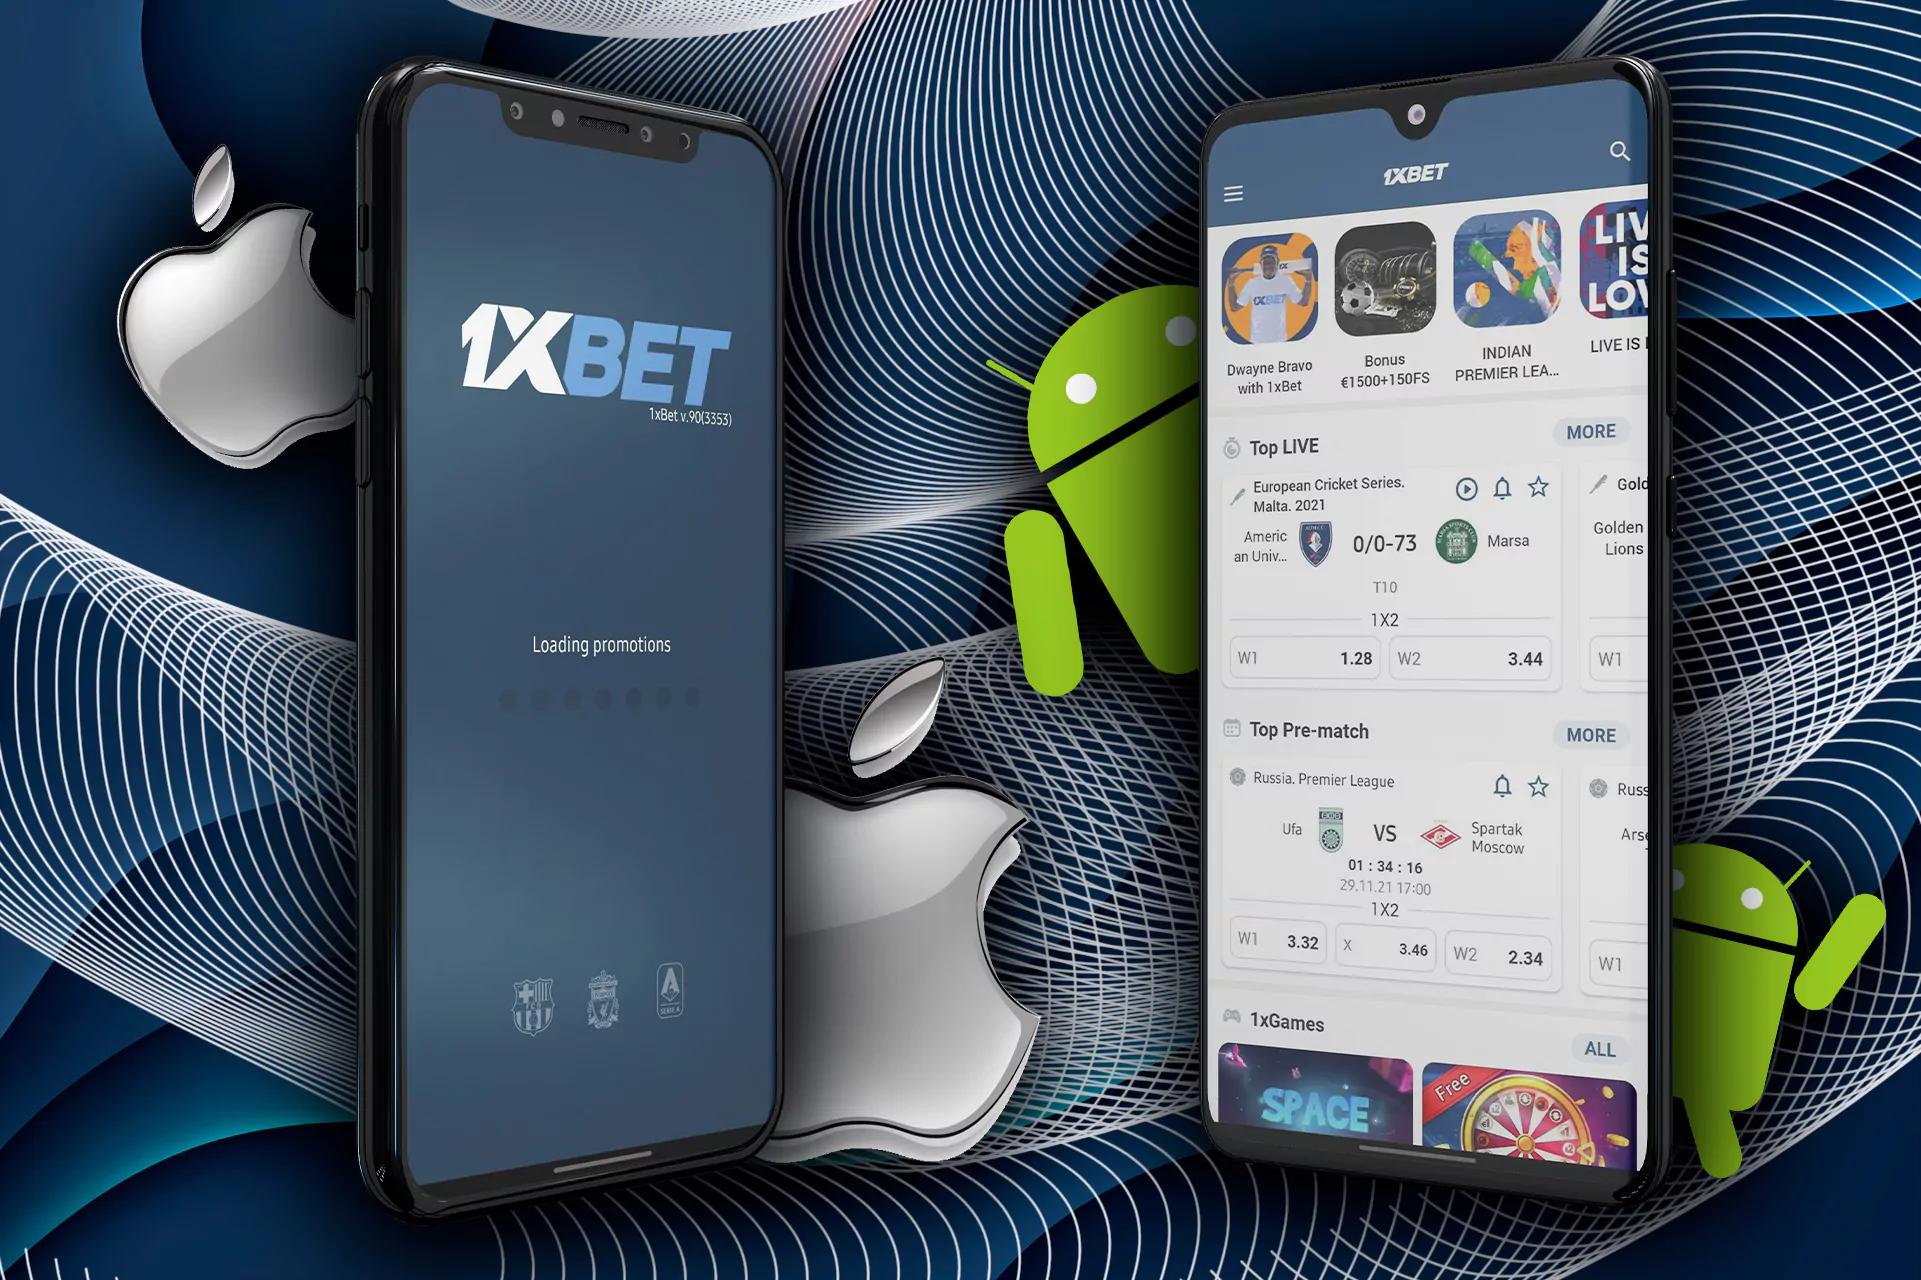 Install the 1xbet app and place bets via your mobile phone.